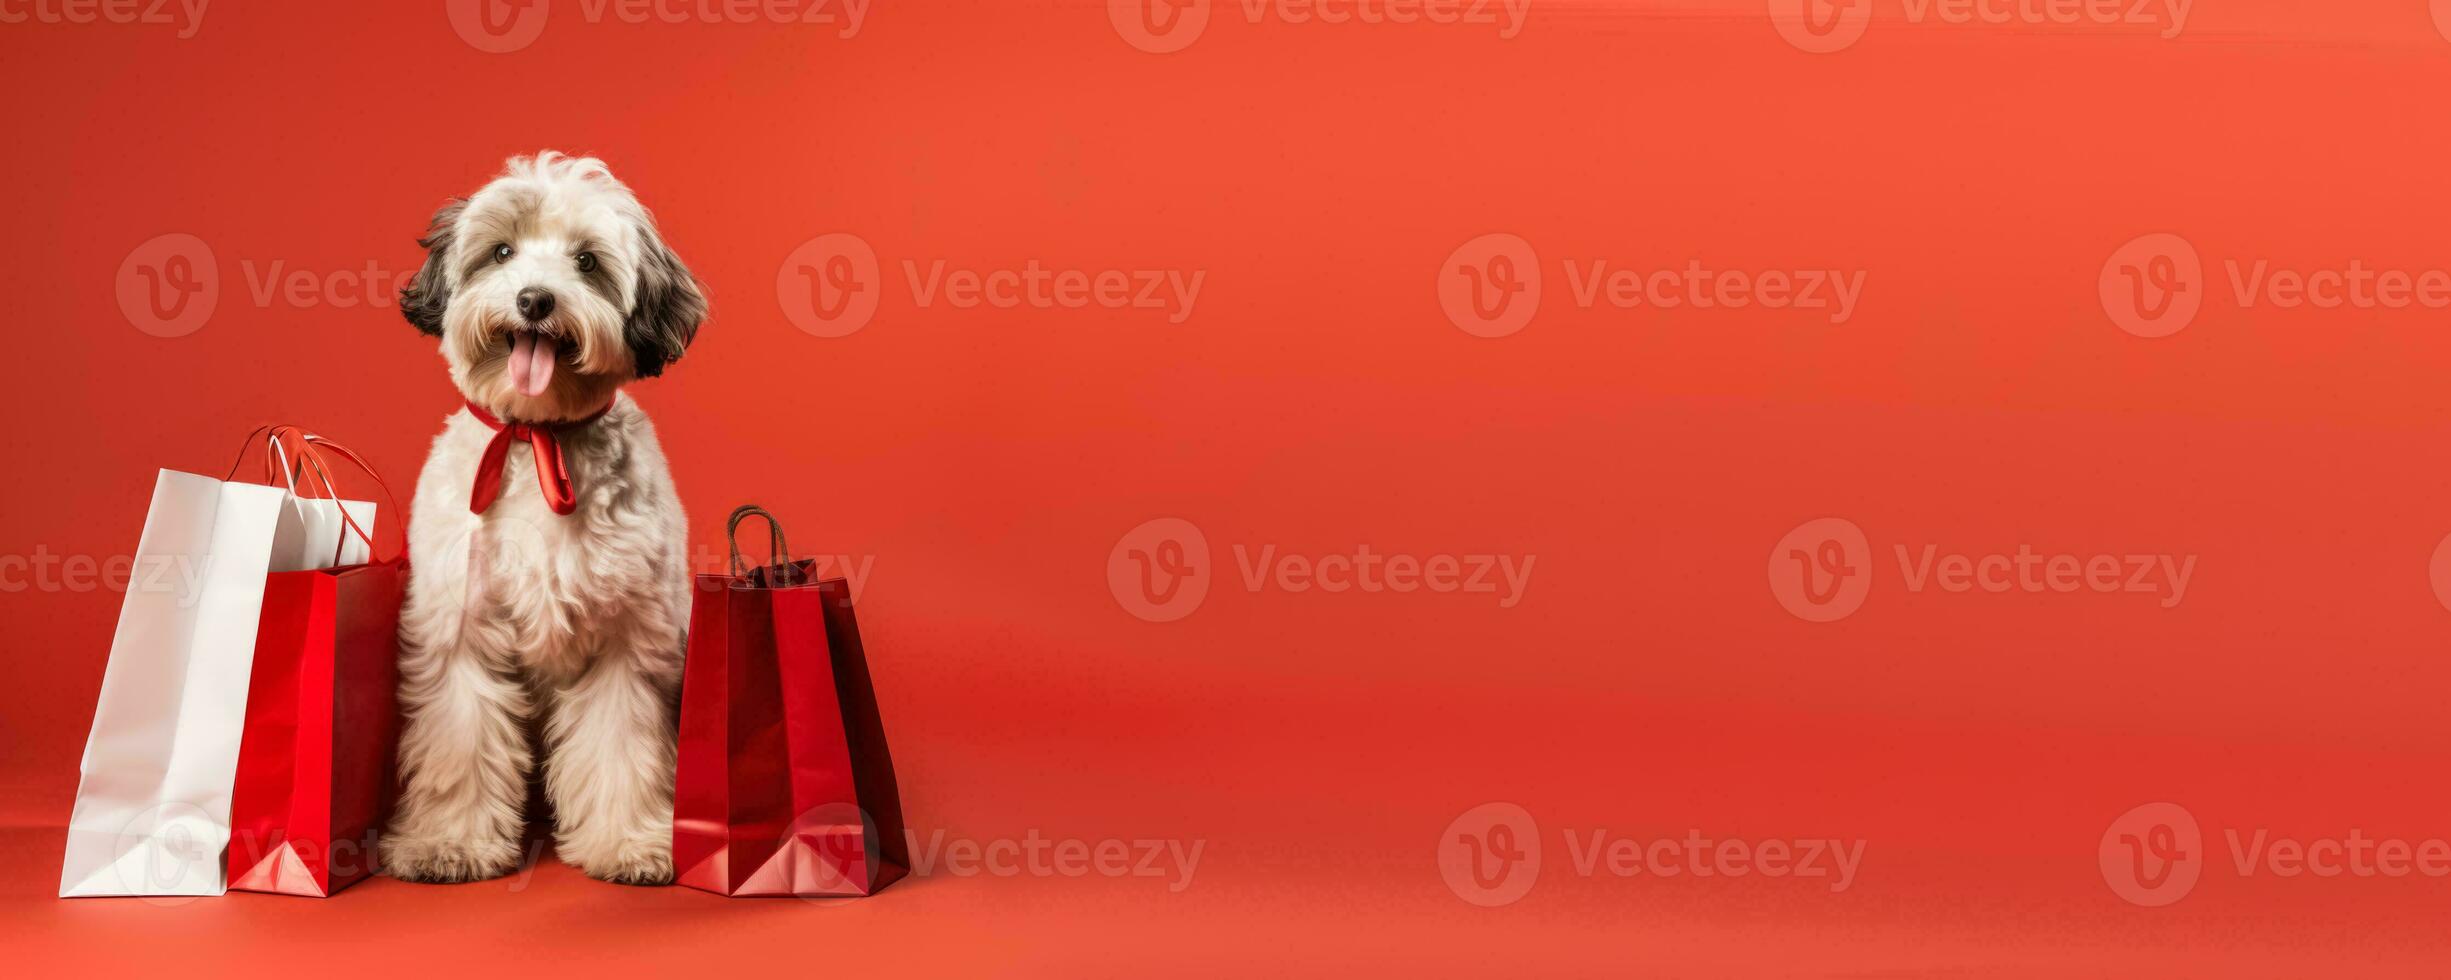 Dog with shopping bags red background with empty space photo